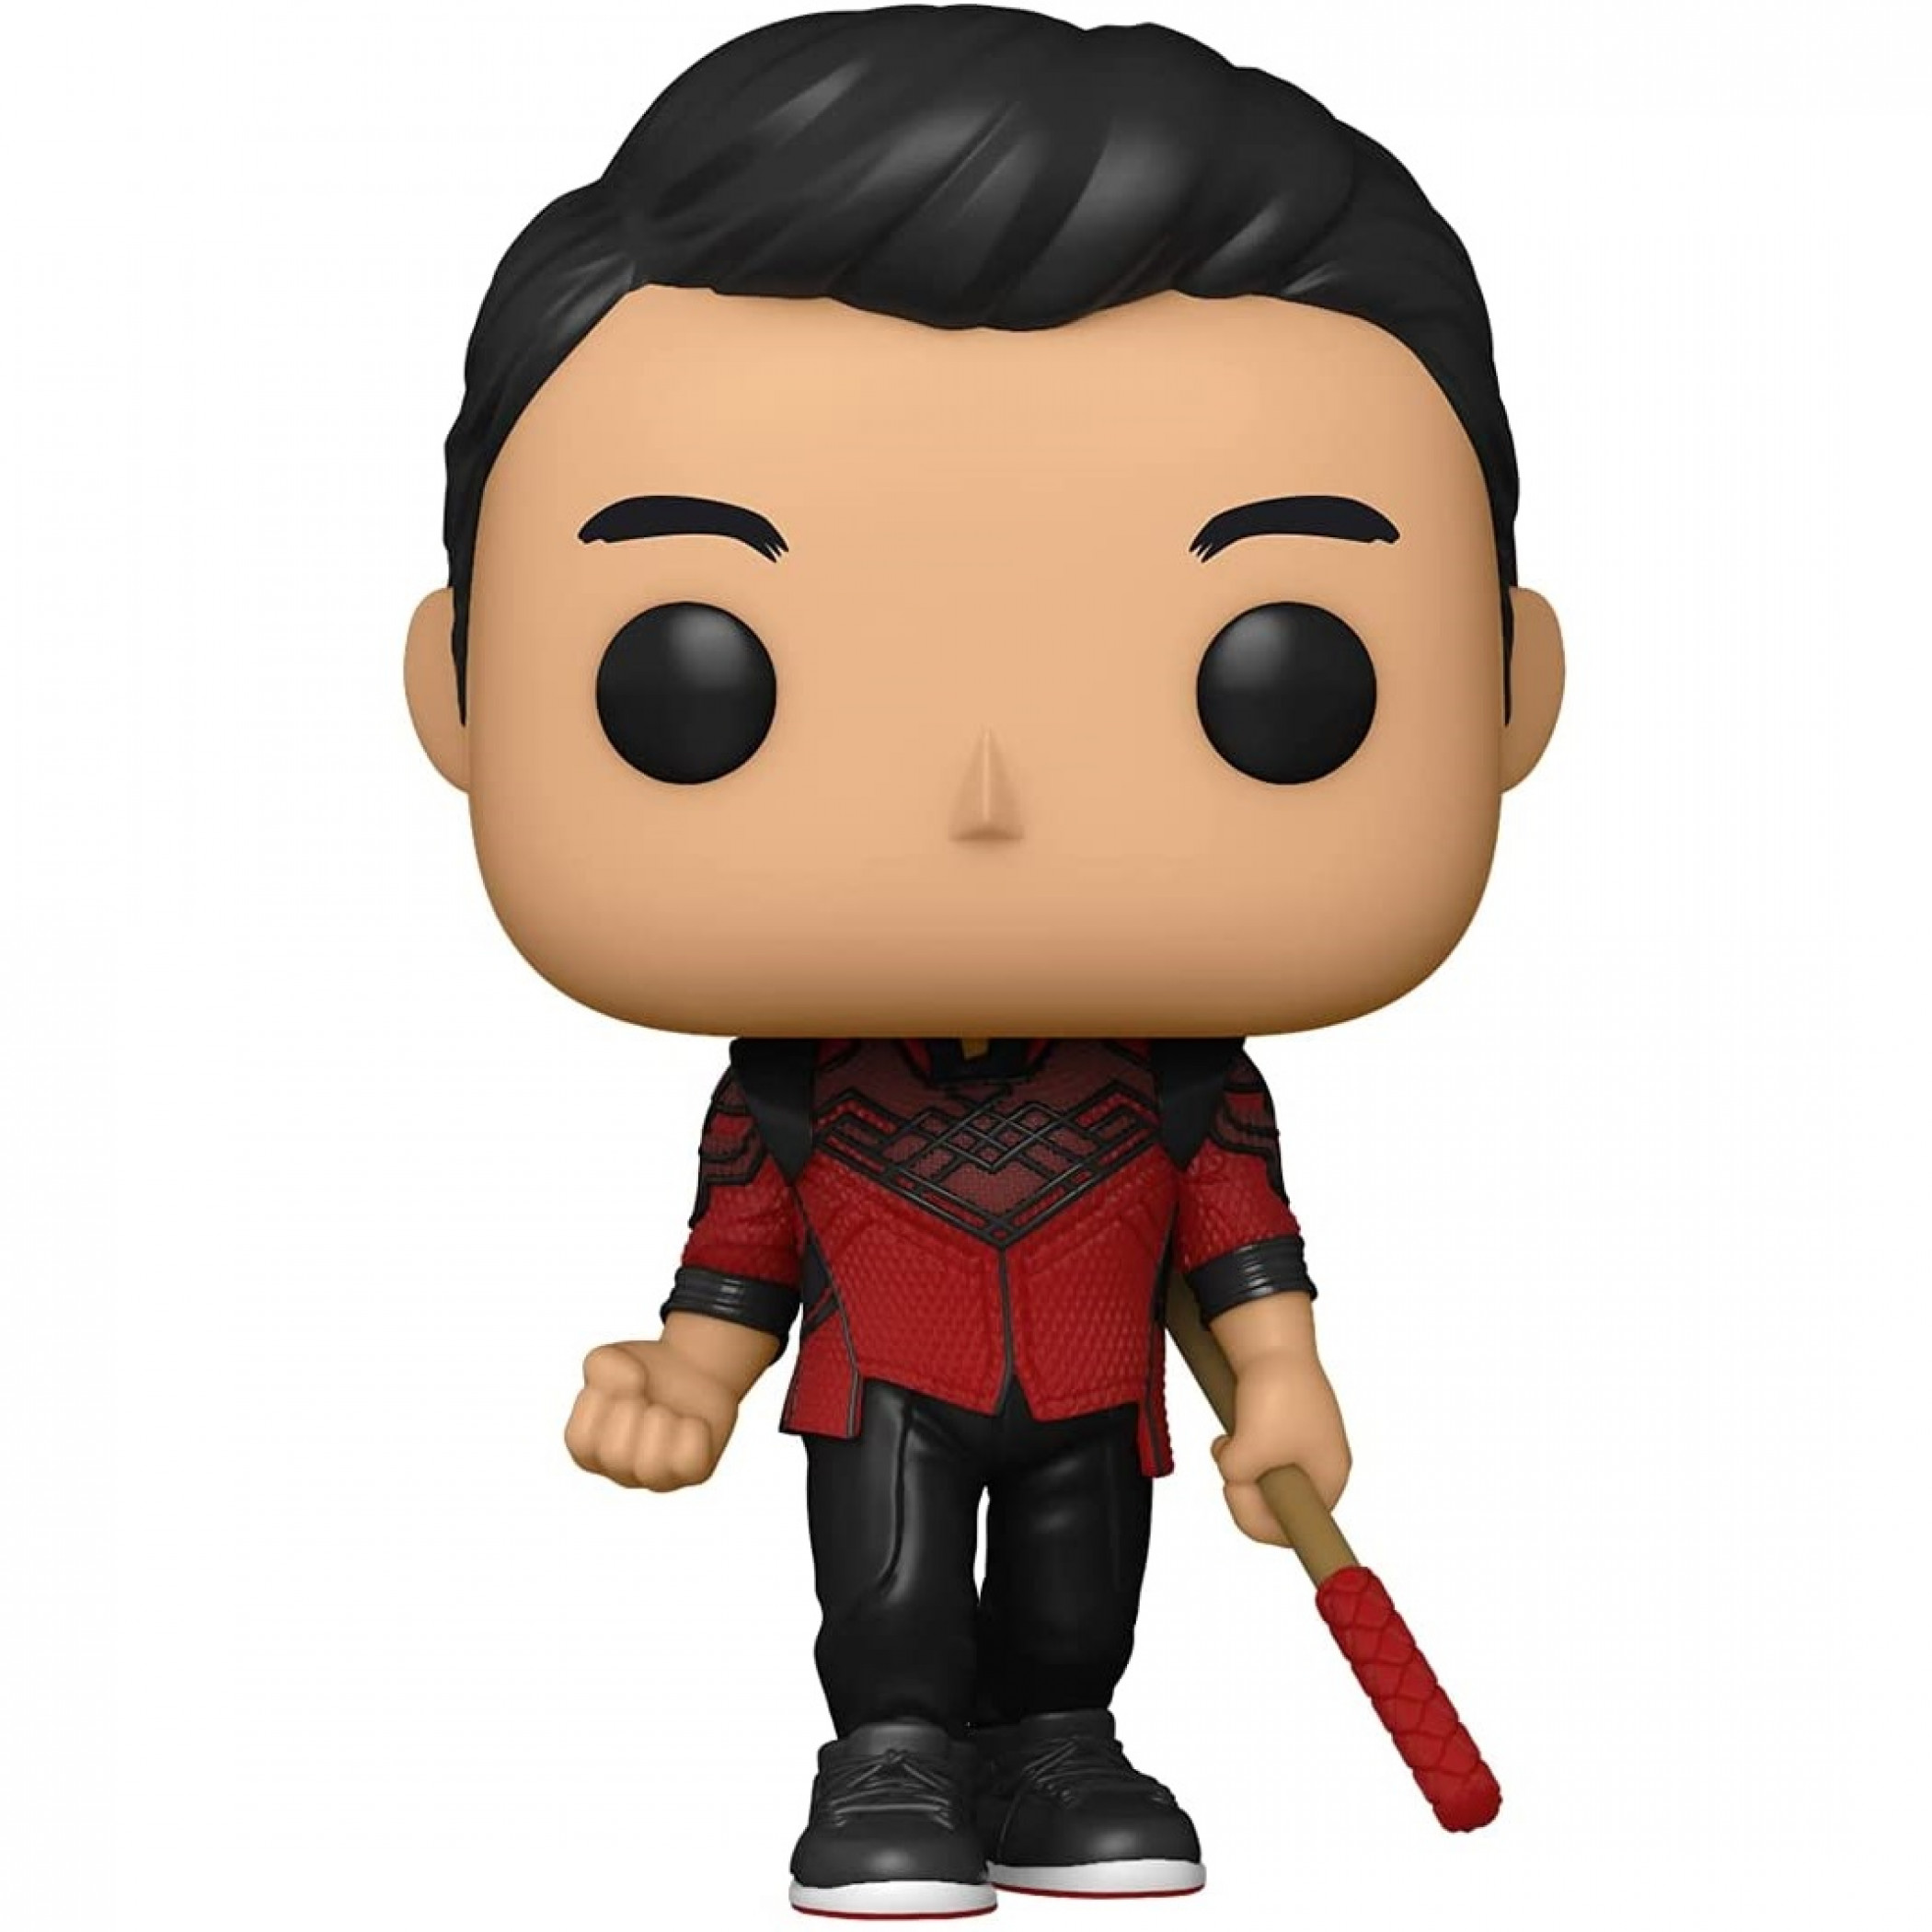 Shang-Chi and the Legends of the Ten Rings Shang-Chi Funko Pop! Vinyl Figure